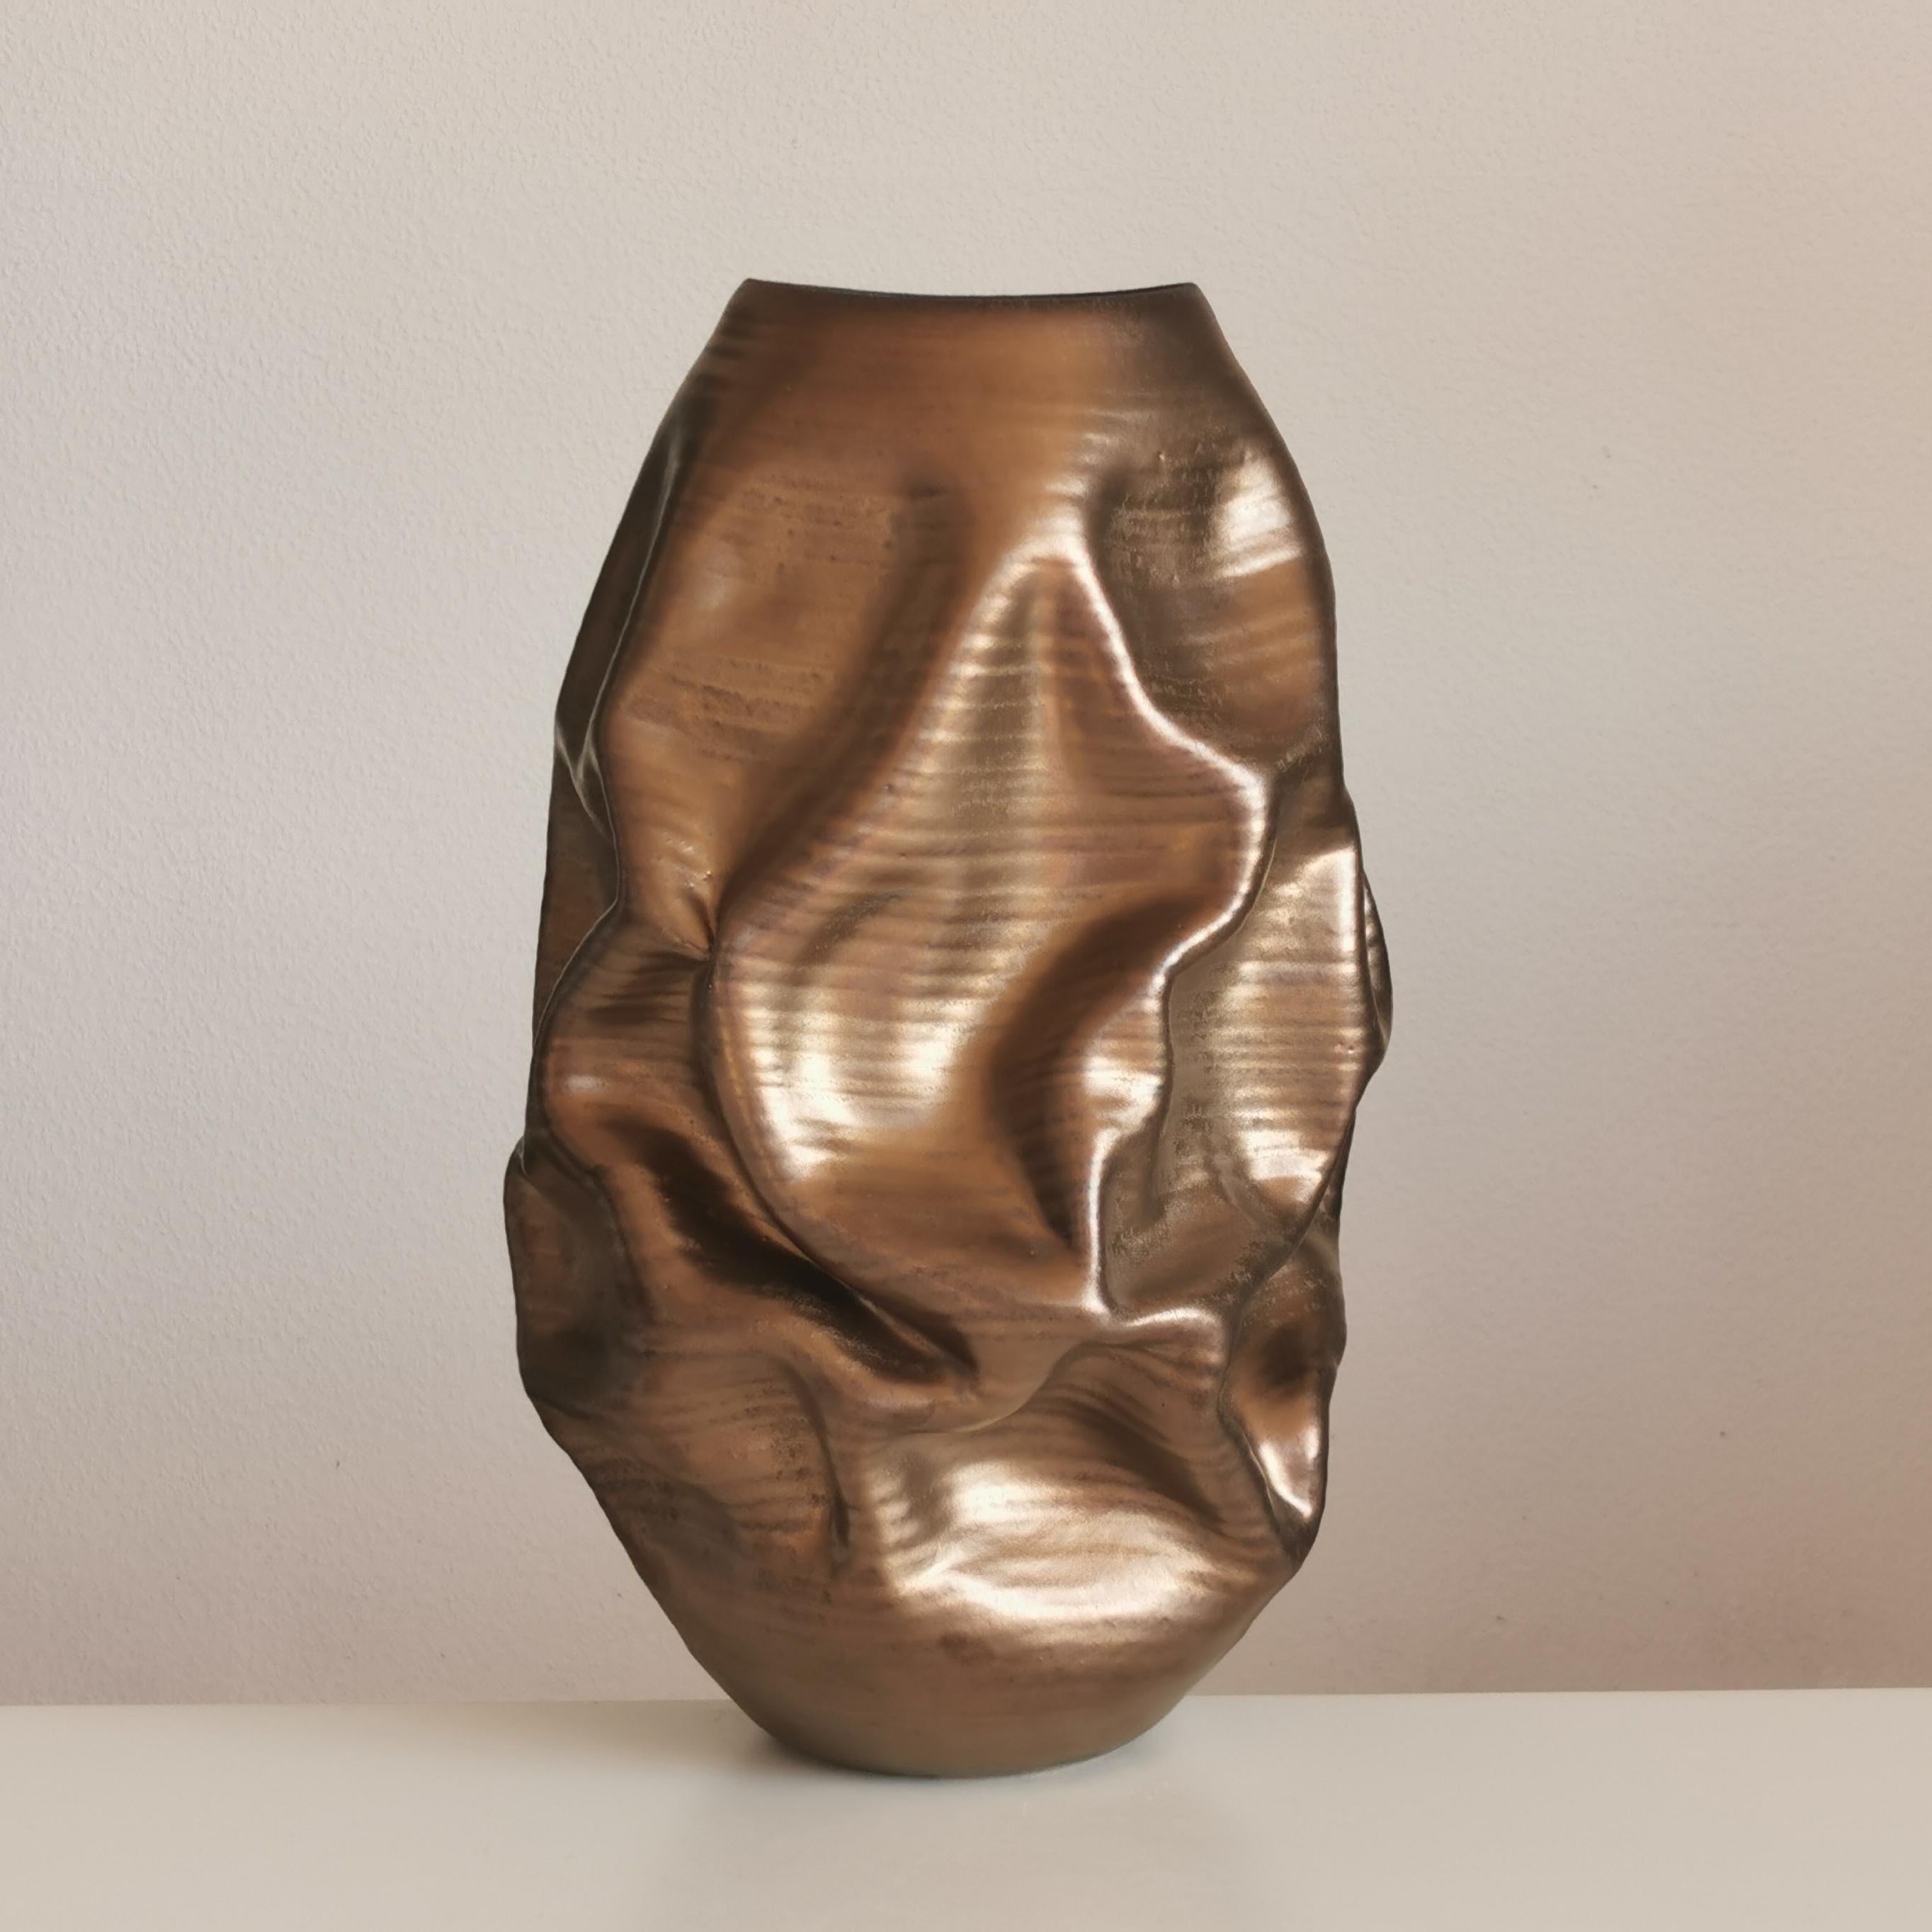 No. 97 tall golden crumpled form. Sumptuous medium sized ceramic vessel from ceramic artist Nicholas Arroyave-Portela.

White St. Thomas clay, Stoneware glazes, multi fired to cone 6 (1223 degrees)

Made in 2022

H 41 cm, W 24 cm wide, D 24